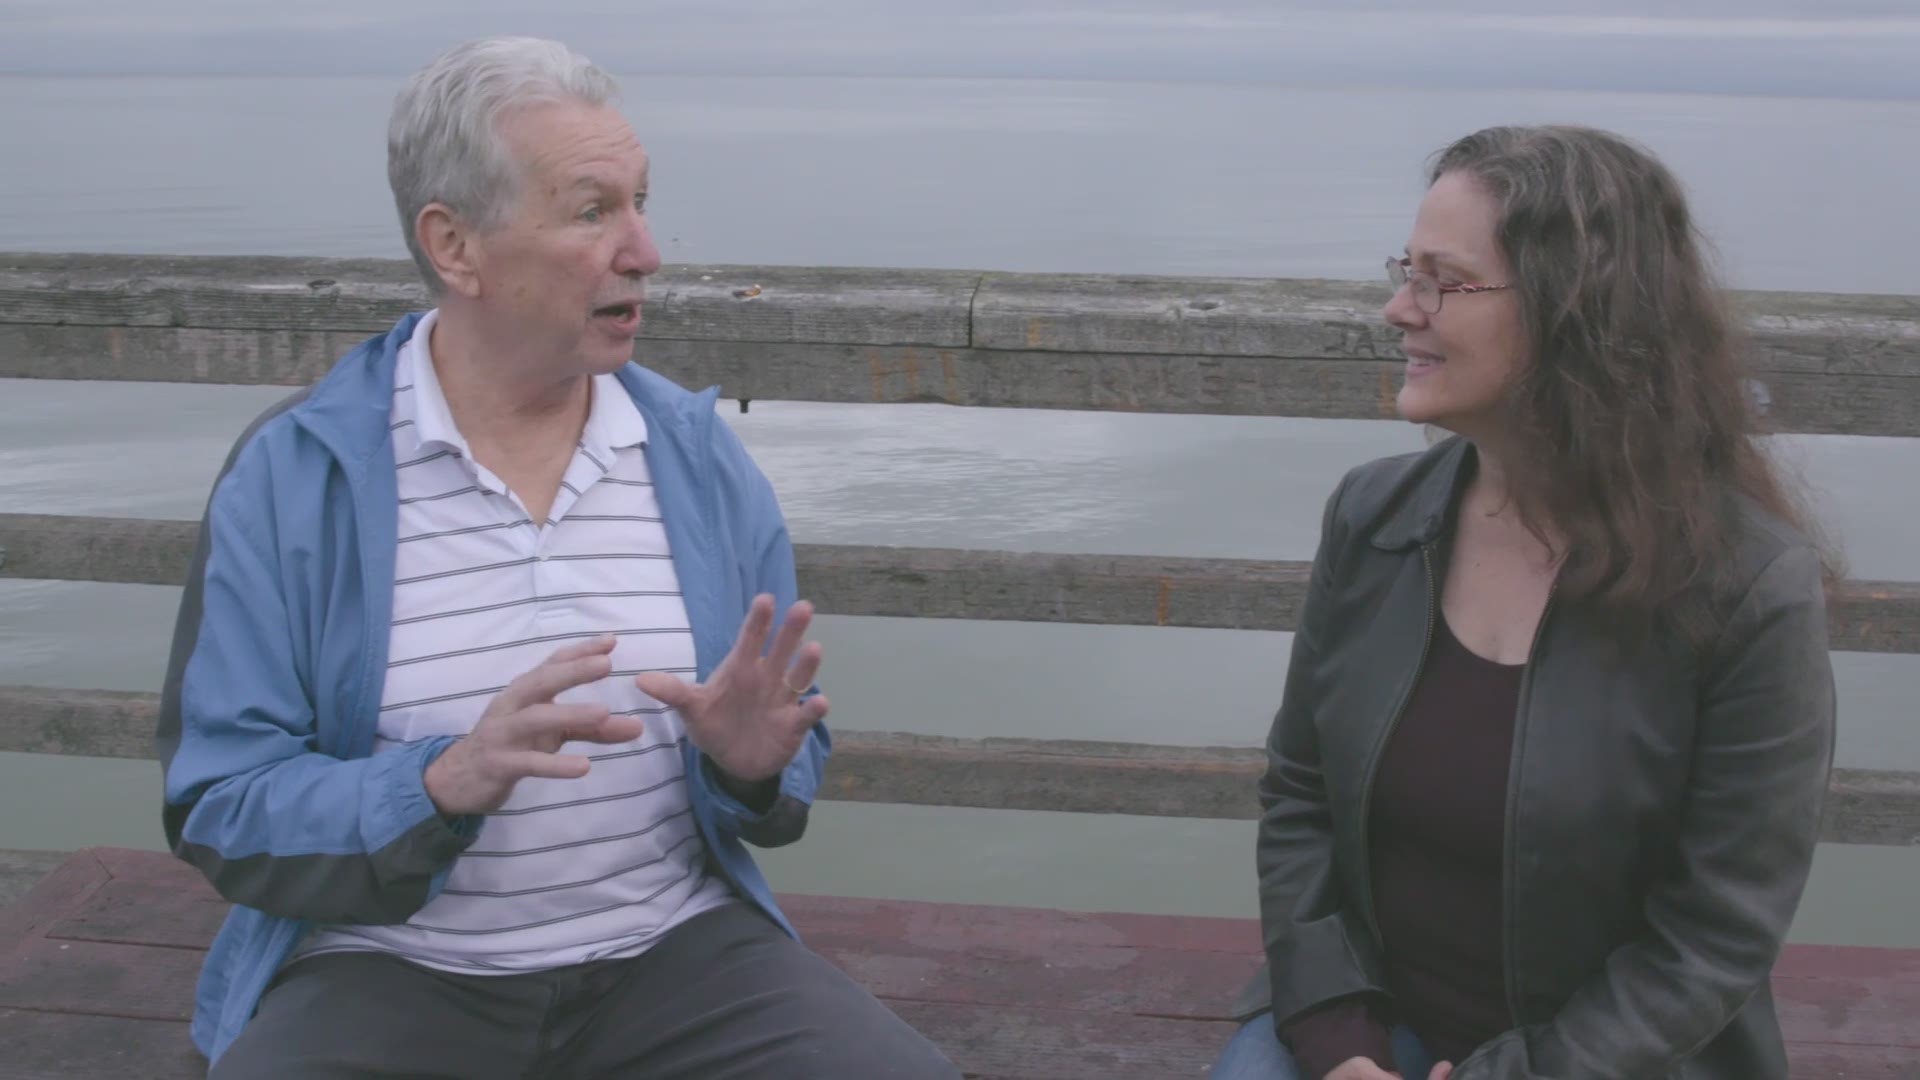 2 people discuss the "proof" of climate change in natural disasters.